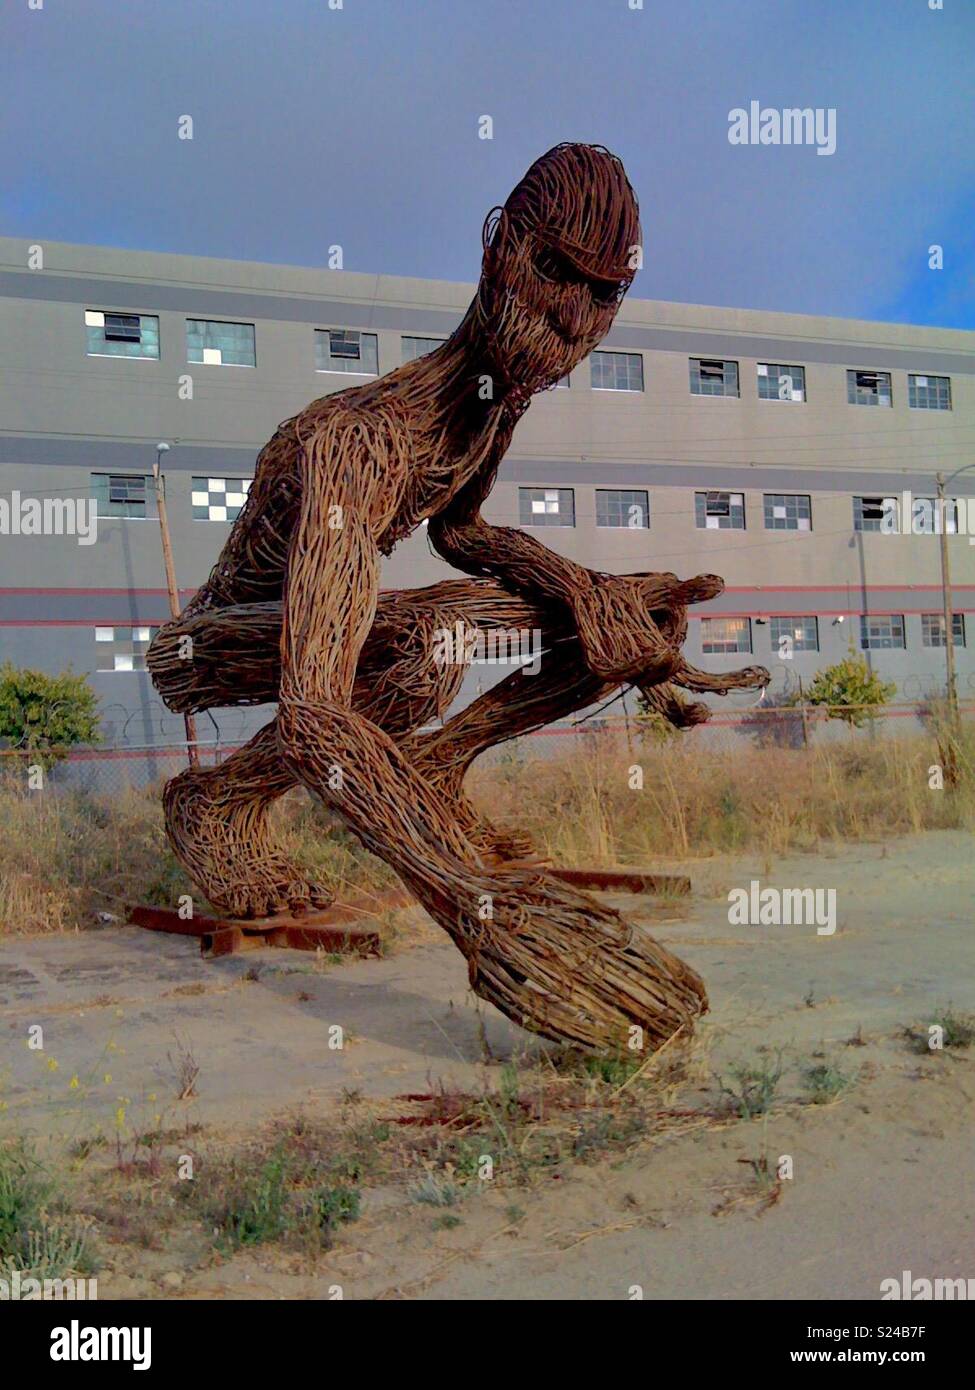 Giant steel sculpture in an empty lot in West Oakland, California, USA. Stock Photo